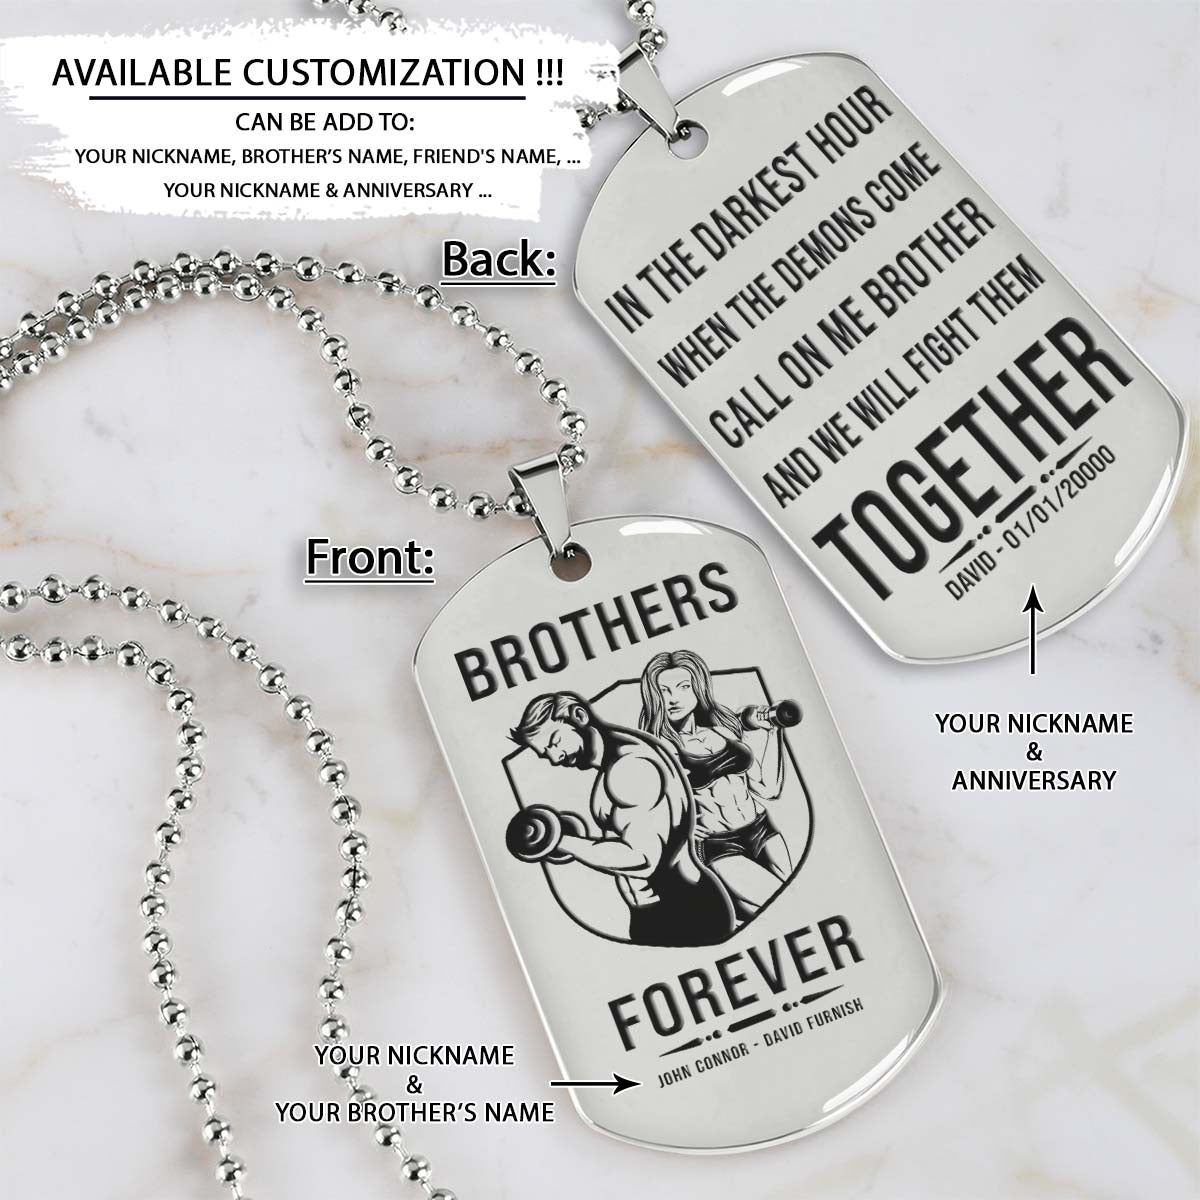 GYMD010 - Brothers Forever - Call On Me Brother - Gym - Fitness Center - Workout - Gym Dog Tag - Gym Necklace - Silver Engrave Dog Tag